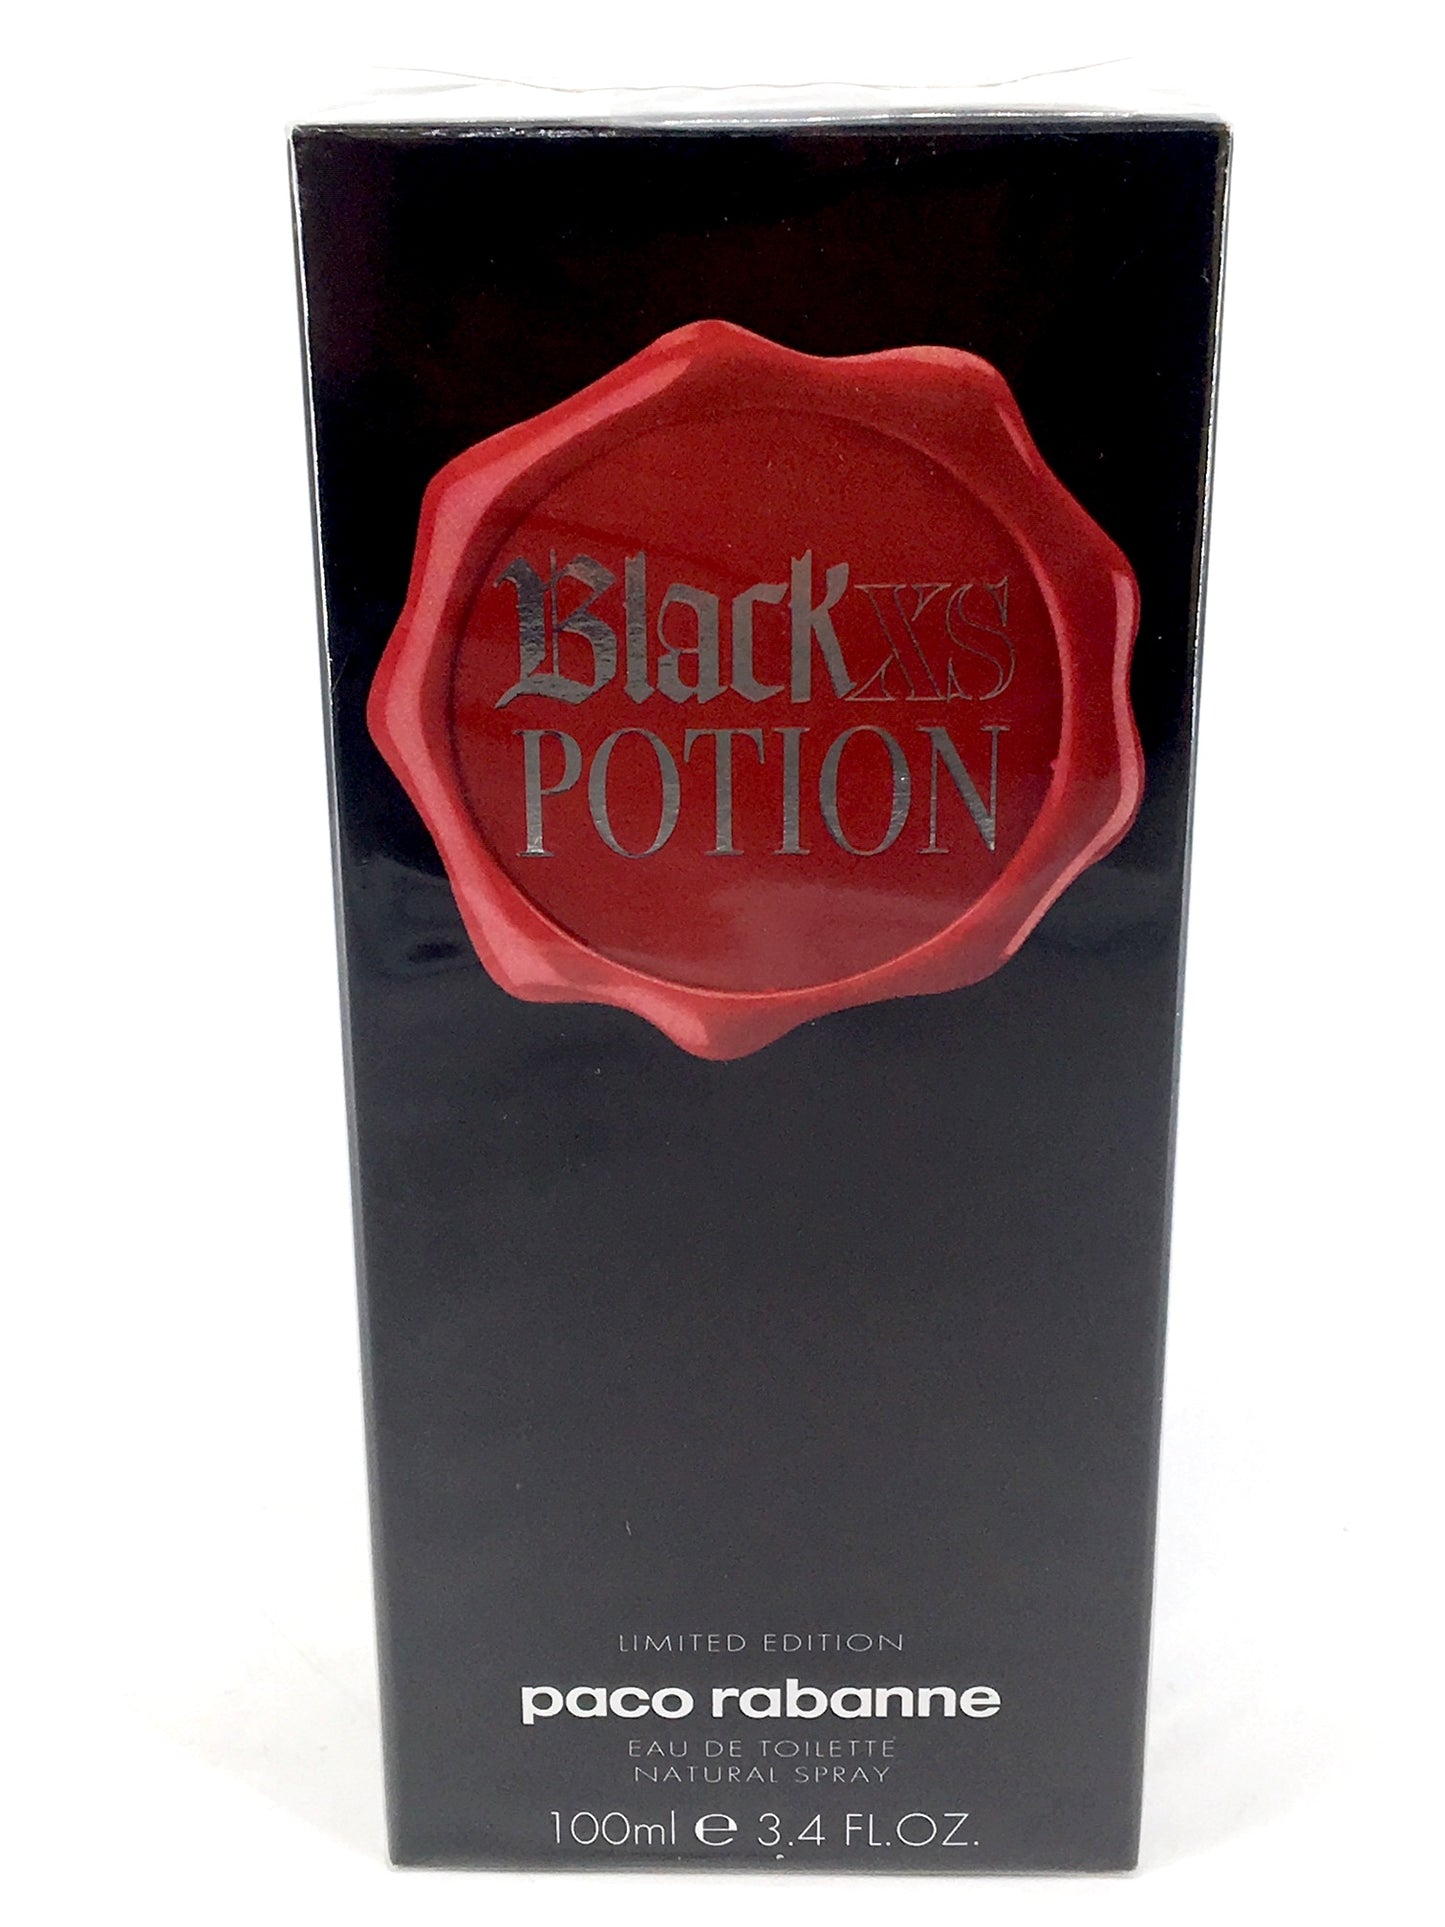 Paco Rabanne Black XS Potion Limited Edition 100ml EDT